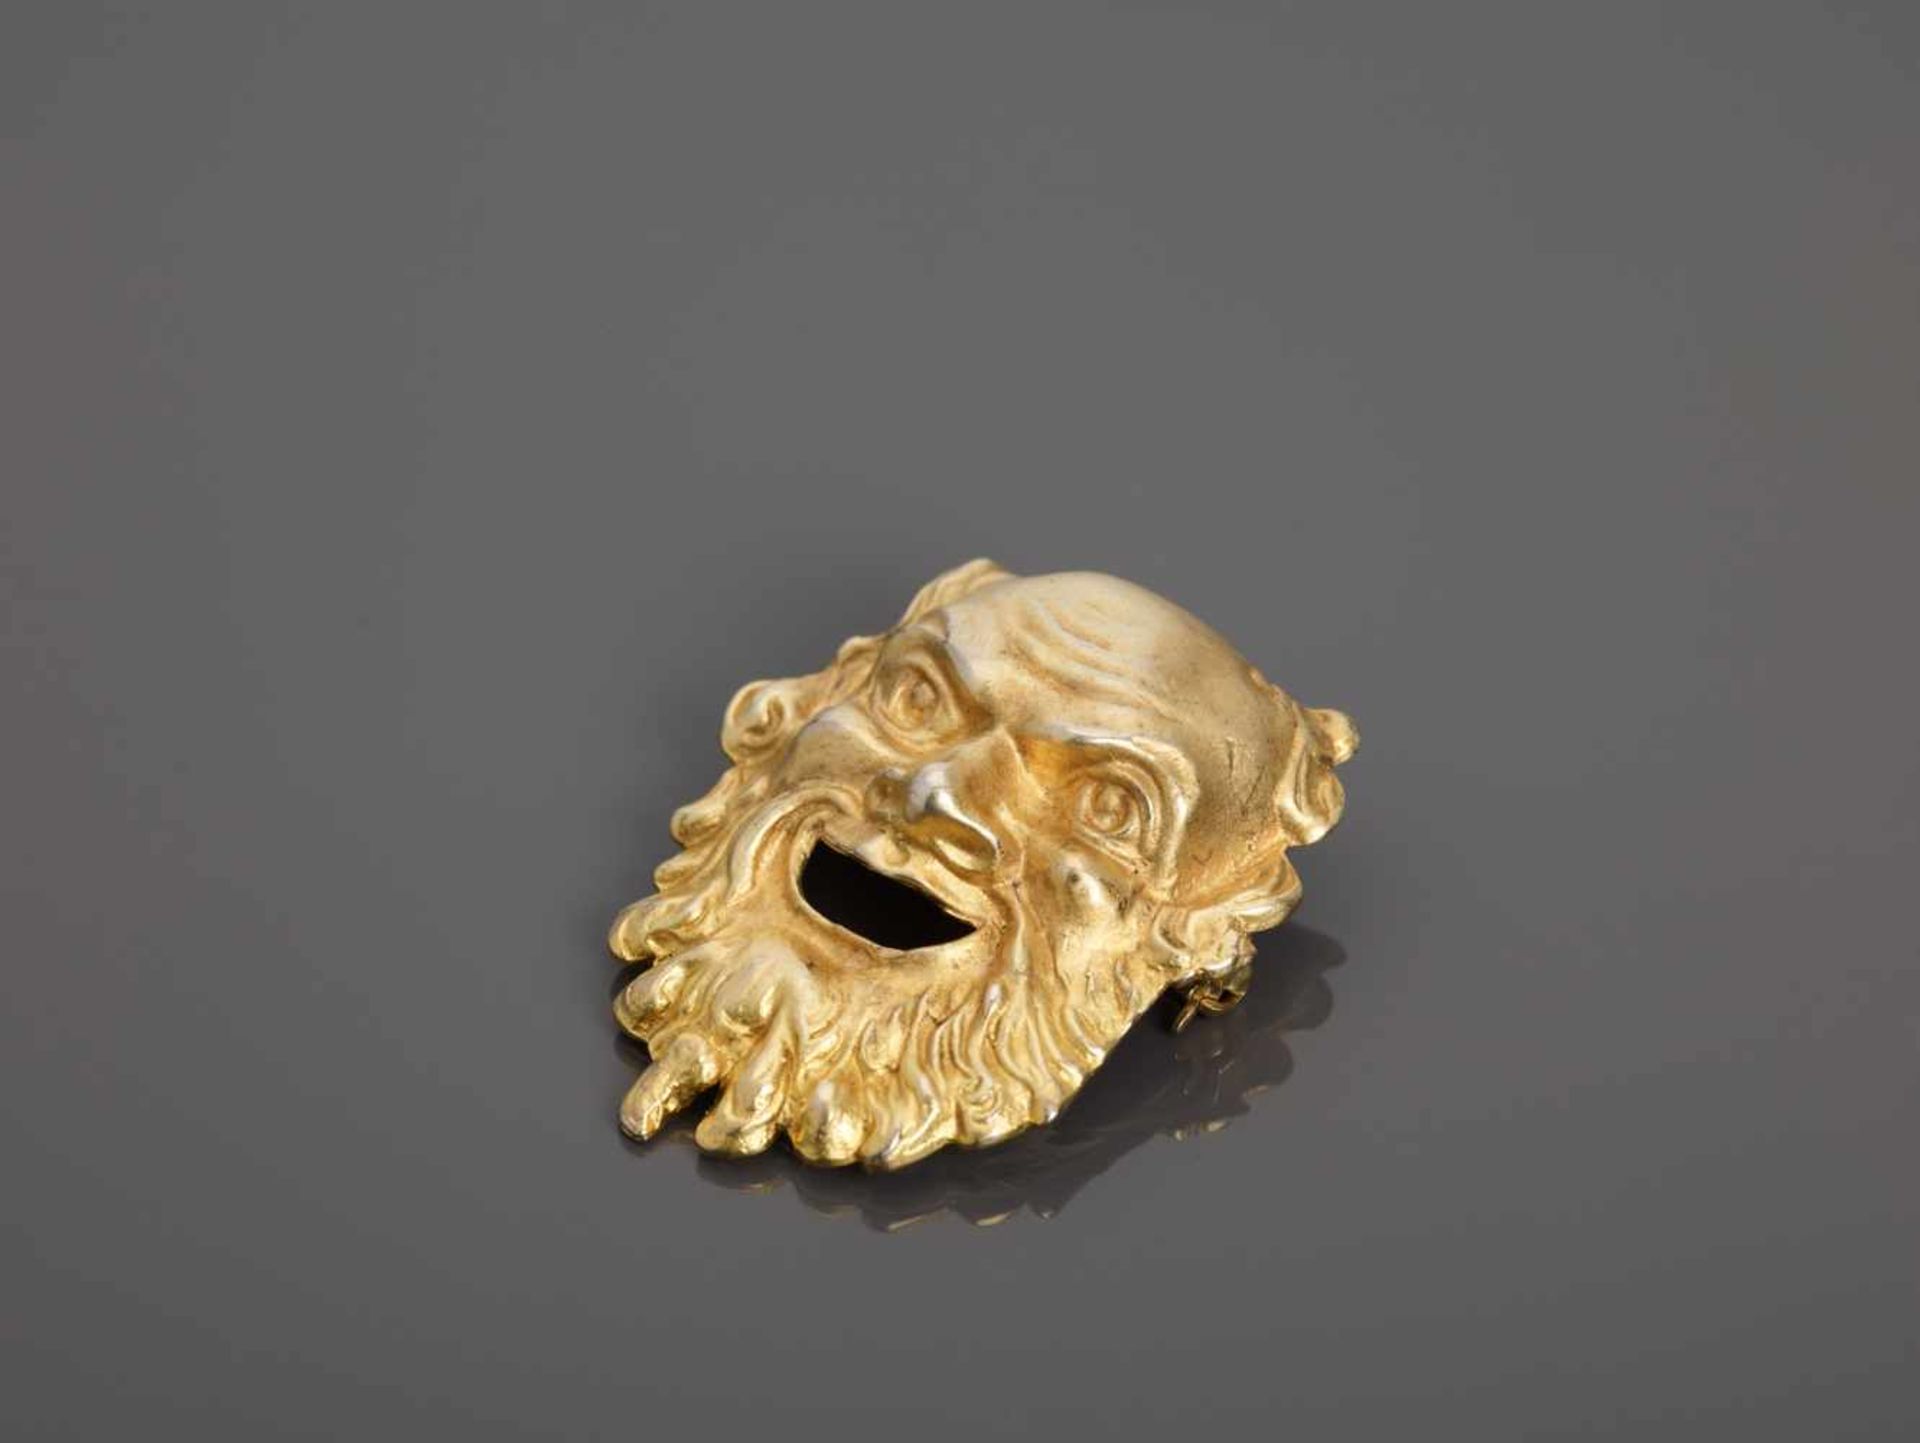 A GOLD-PLATED SILVER BROOCH IN SHAPE OF A LAUGHING ROMAN GOD, 1930sAustria1930s, hallmarked ‘835’ - Image 5 of 6